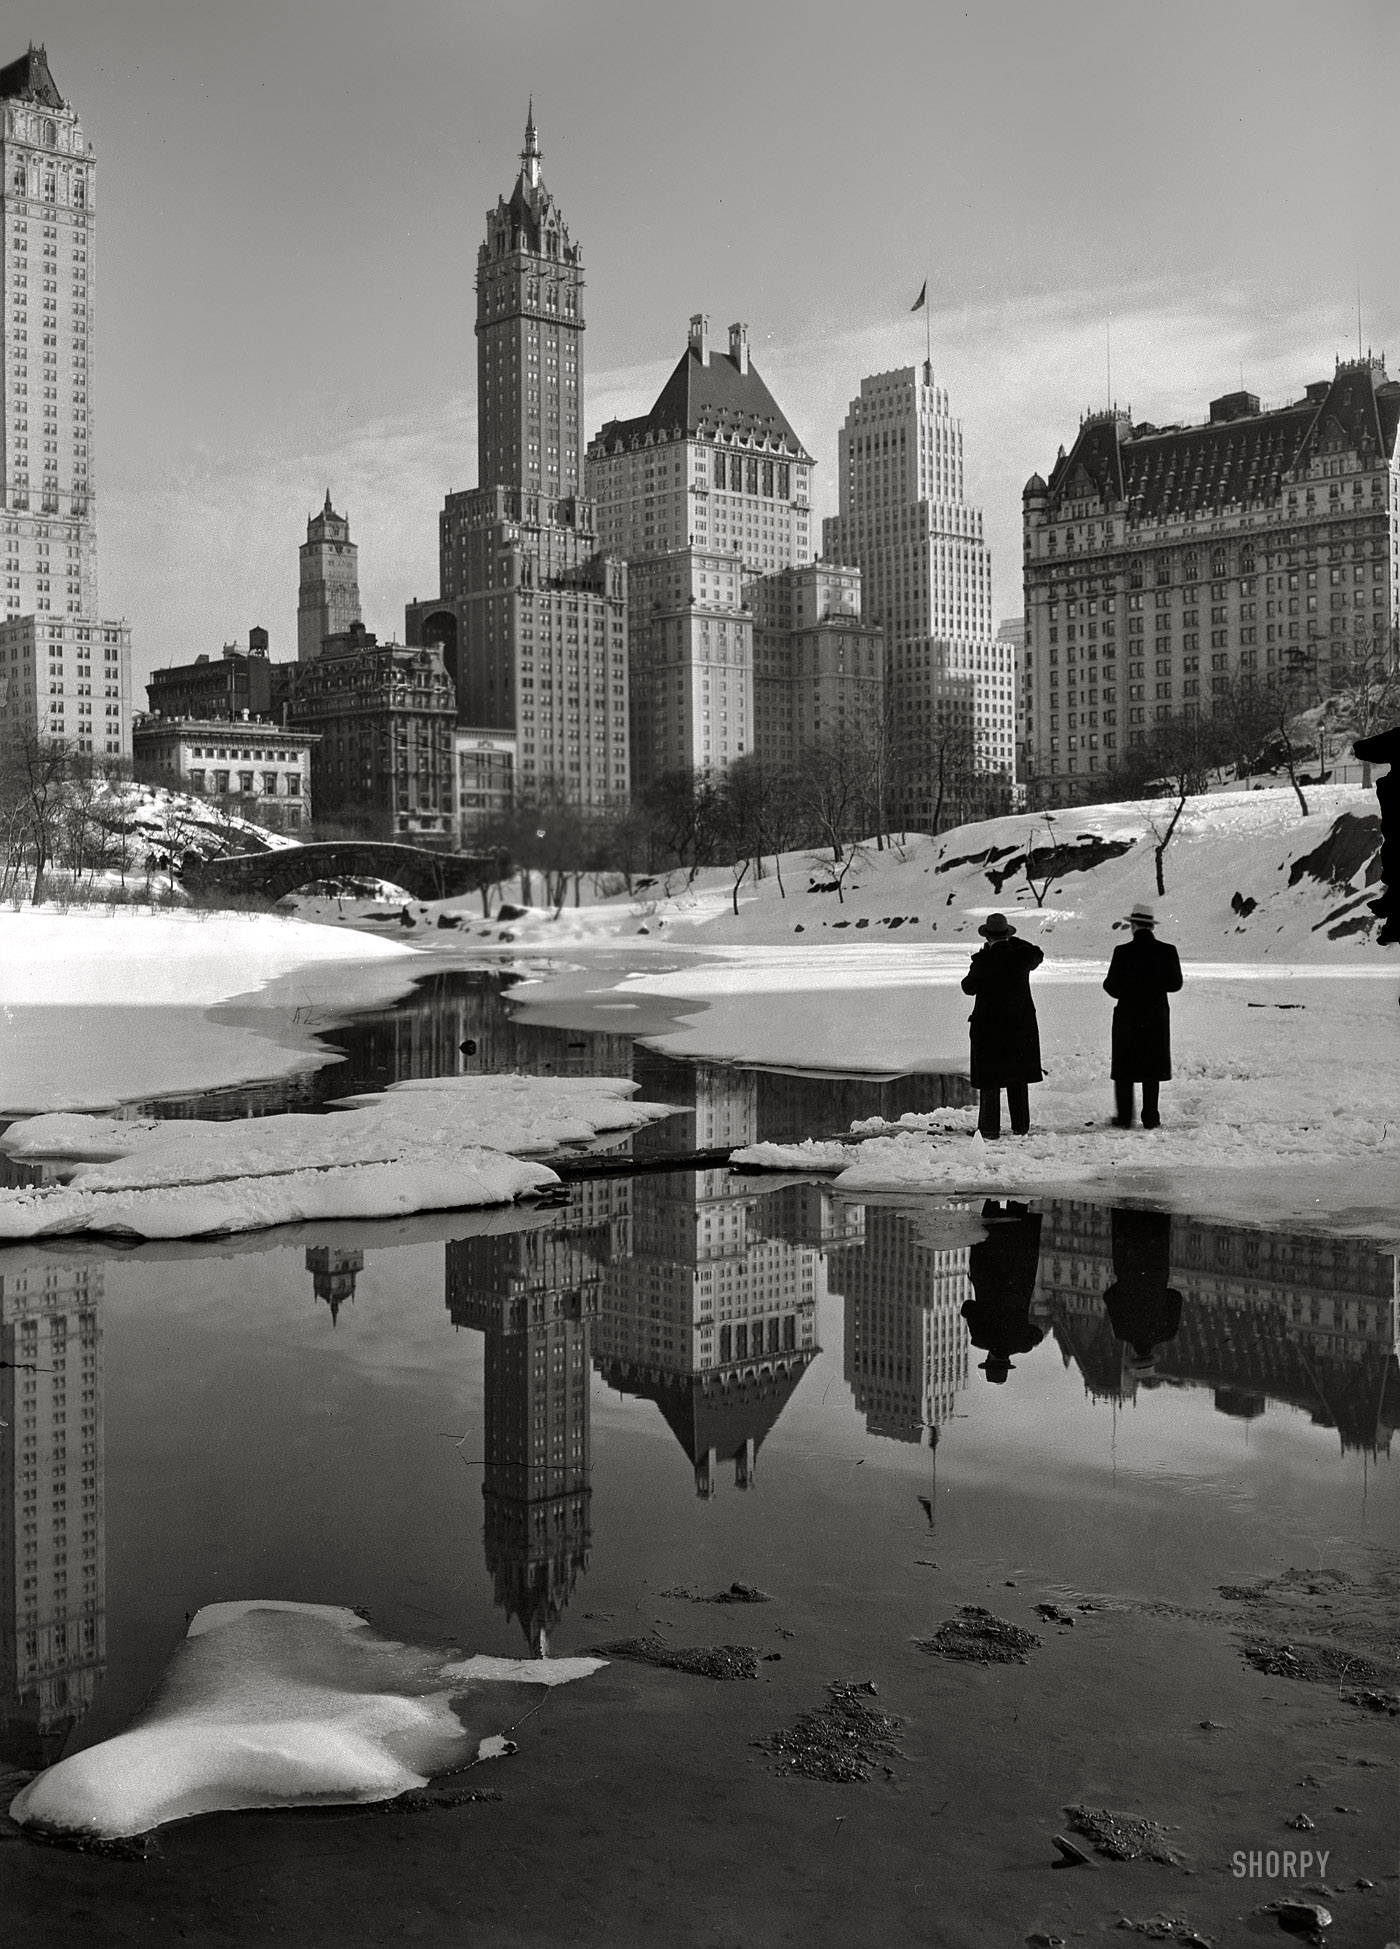 February 12, 1933. "New York City views. Plaza buildings from Central Park." The Savoy Plaza and Plaza hotels. Gottscho-Schleisner photo. View full size.